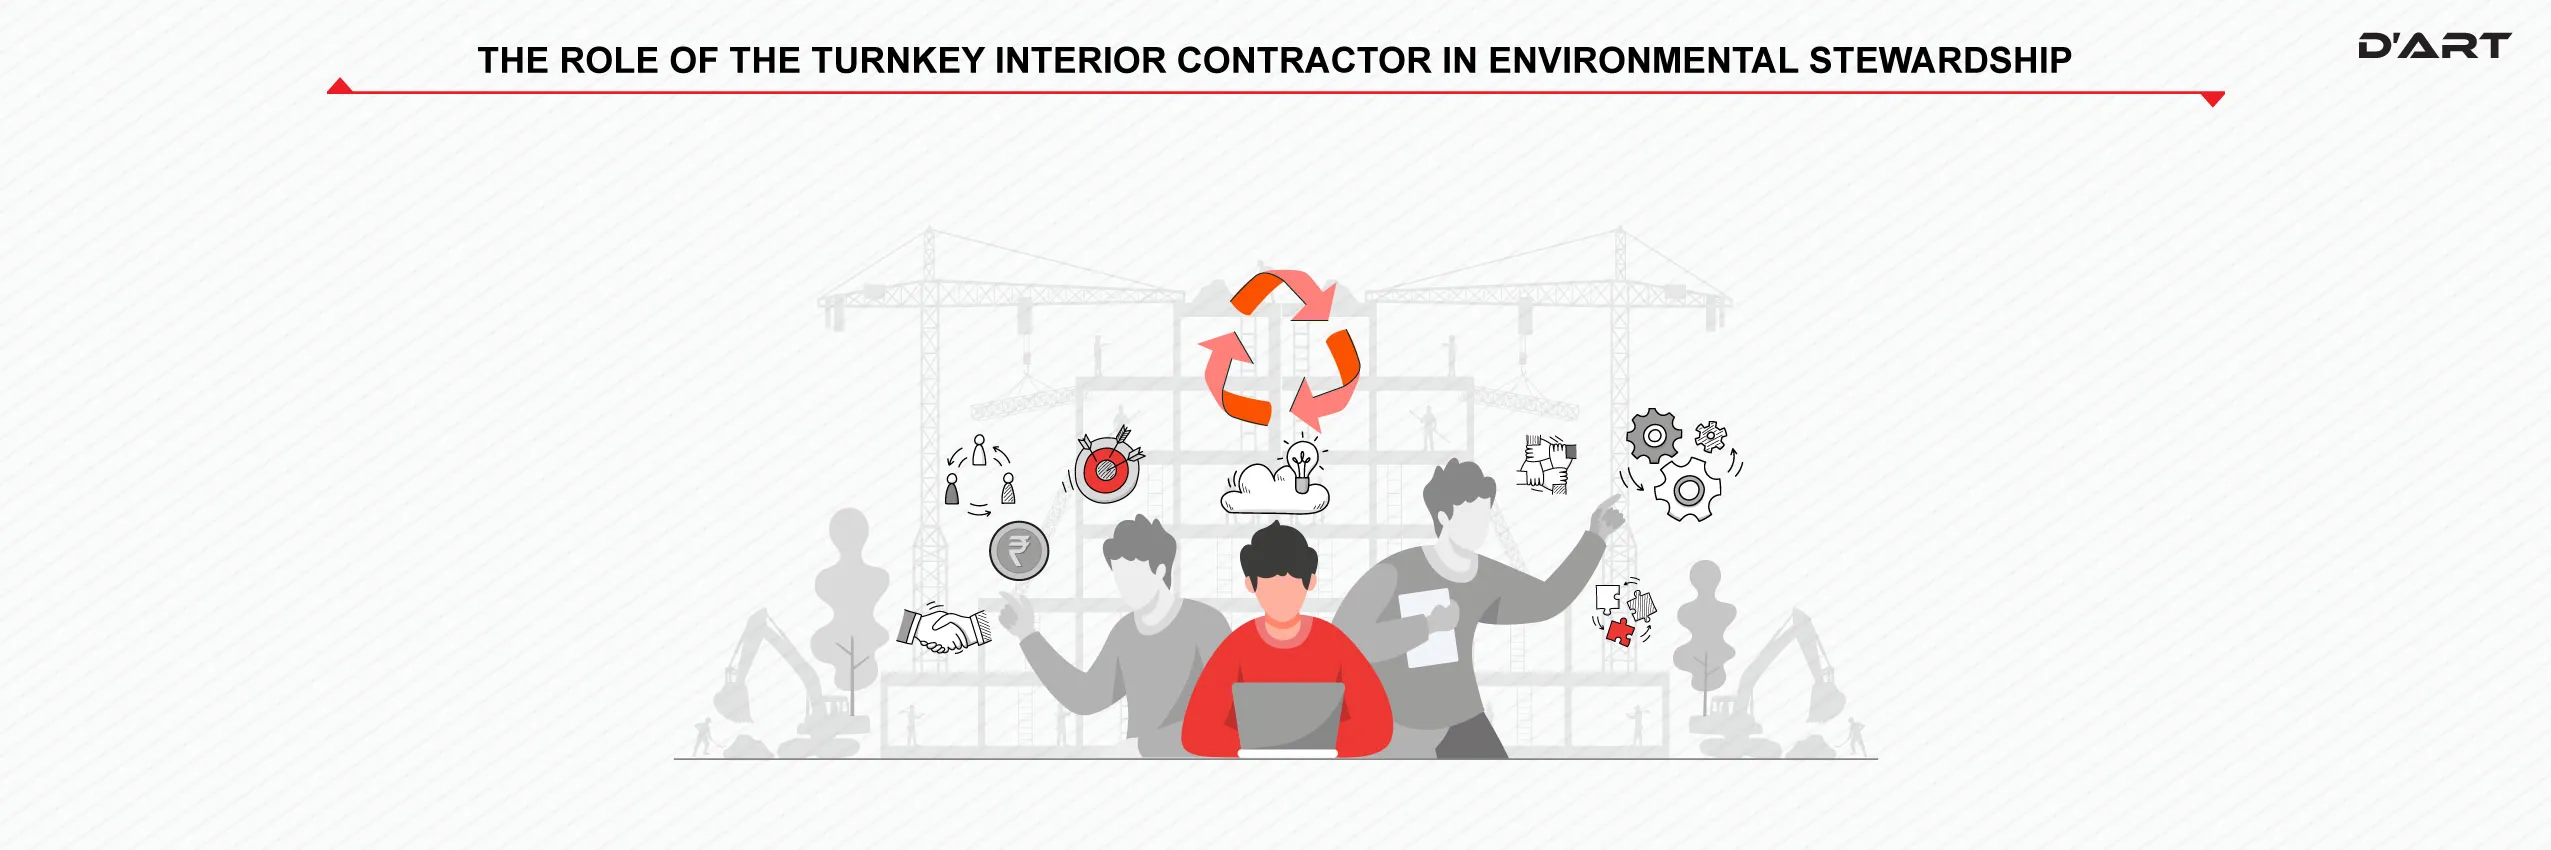 The role of the turnkey interior contractor in environmental stewardship